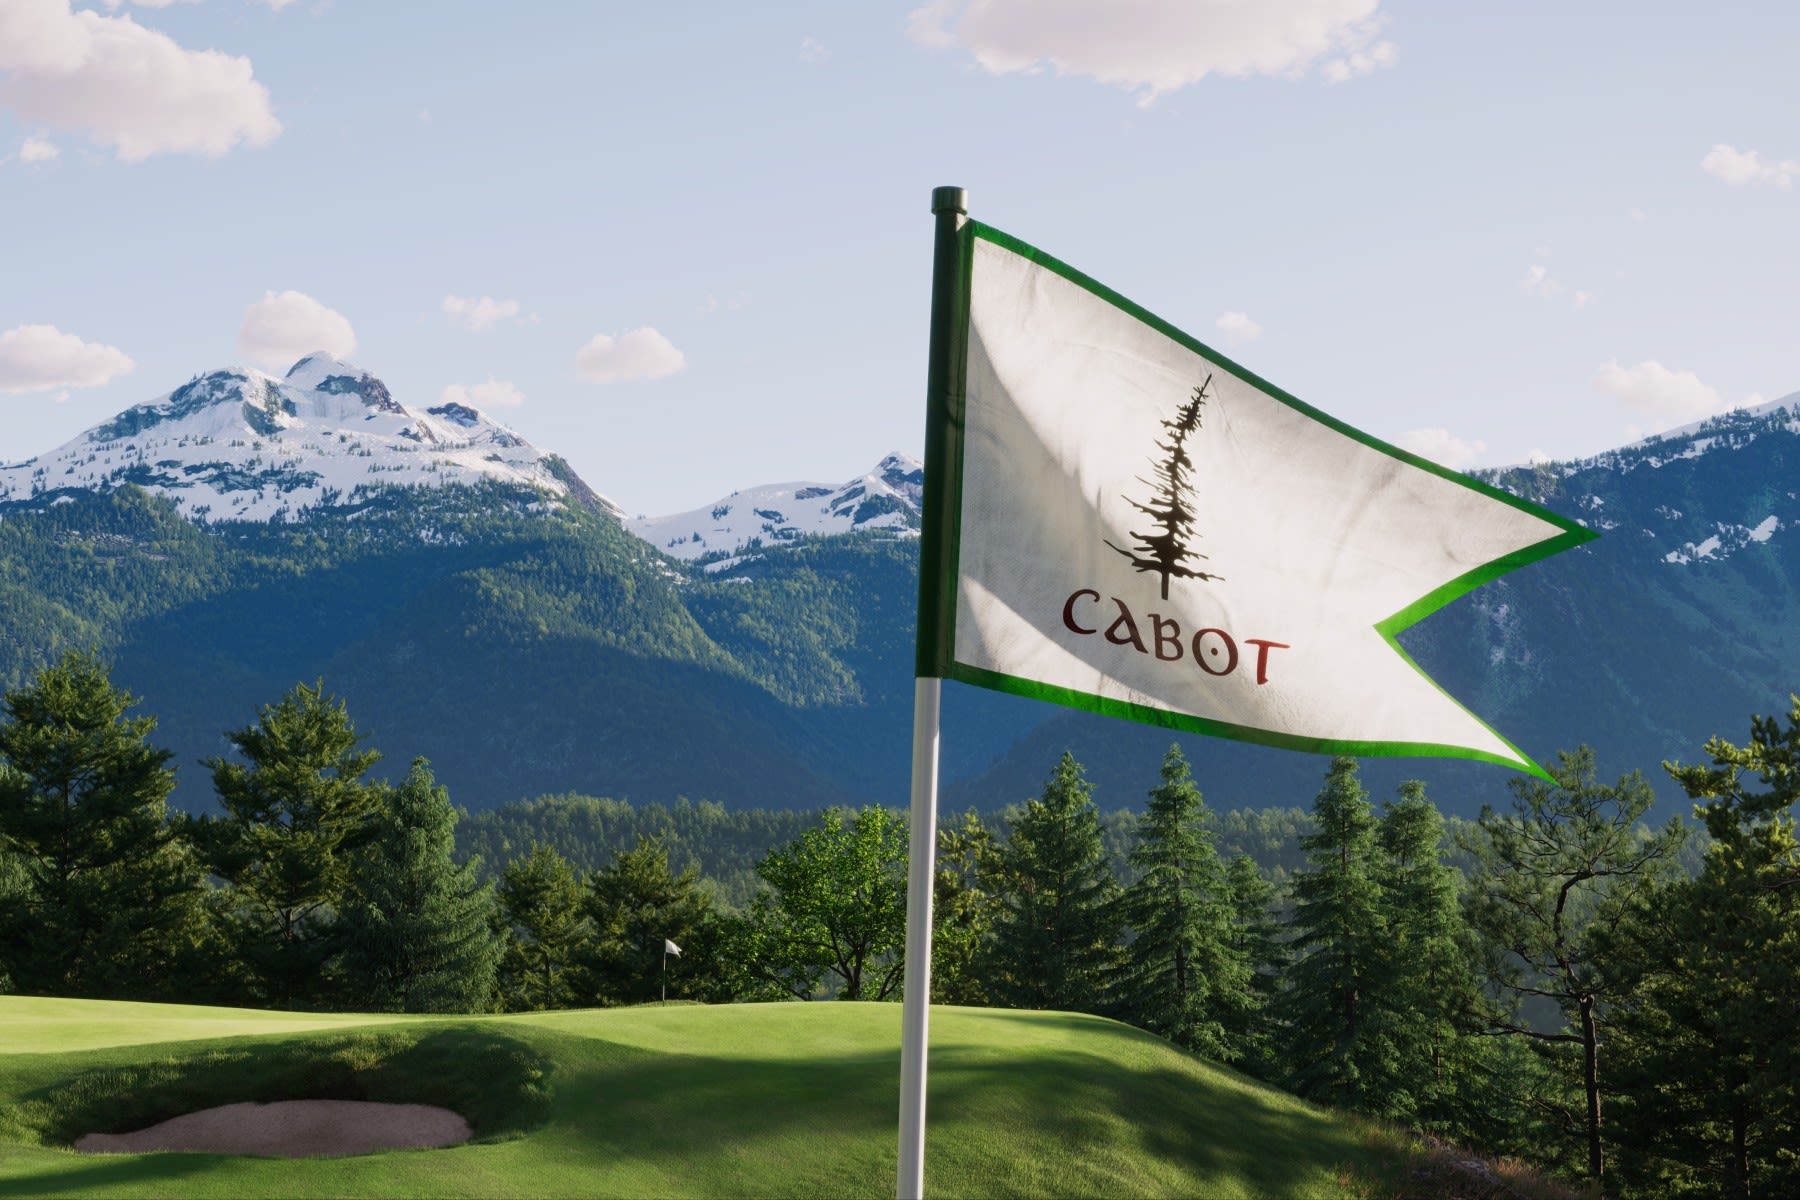 The soon-to-be opened Cabot Revelstoke.